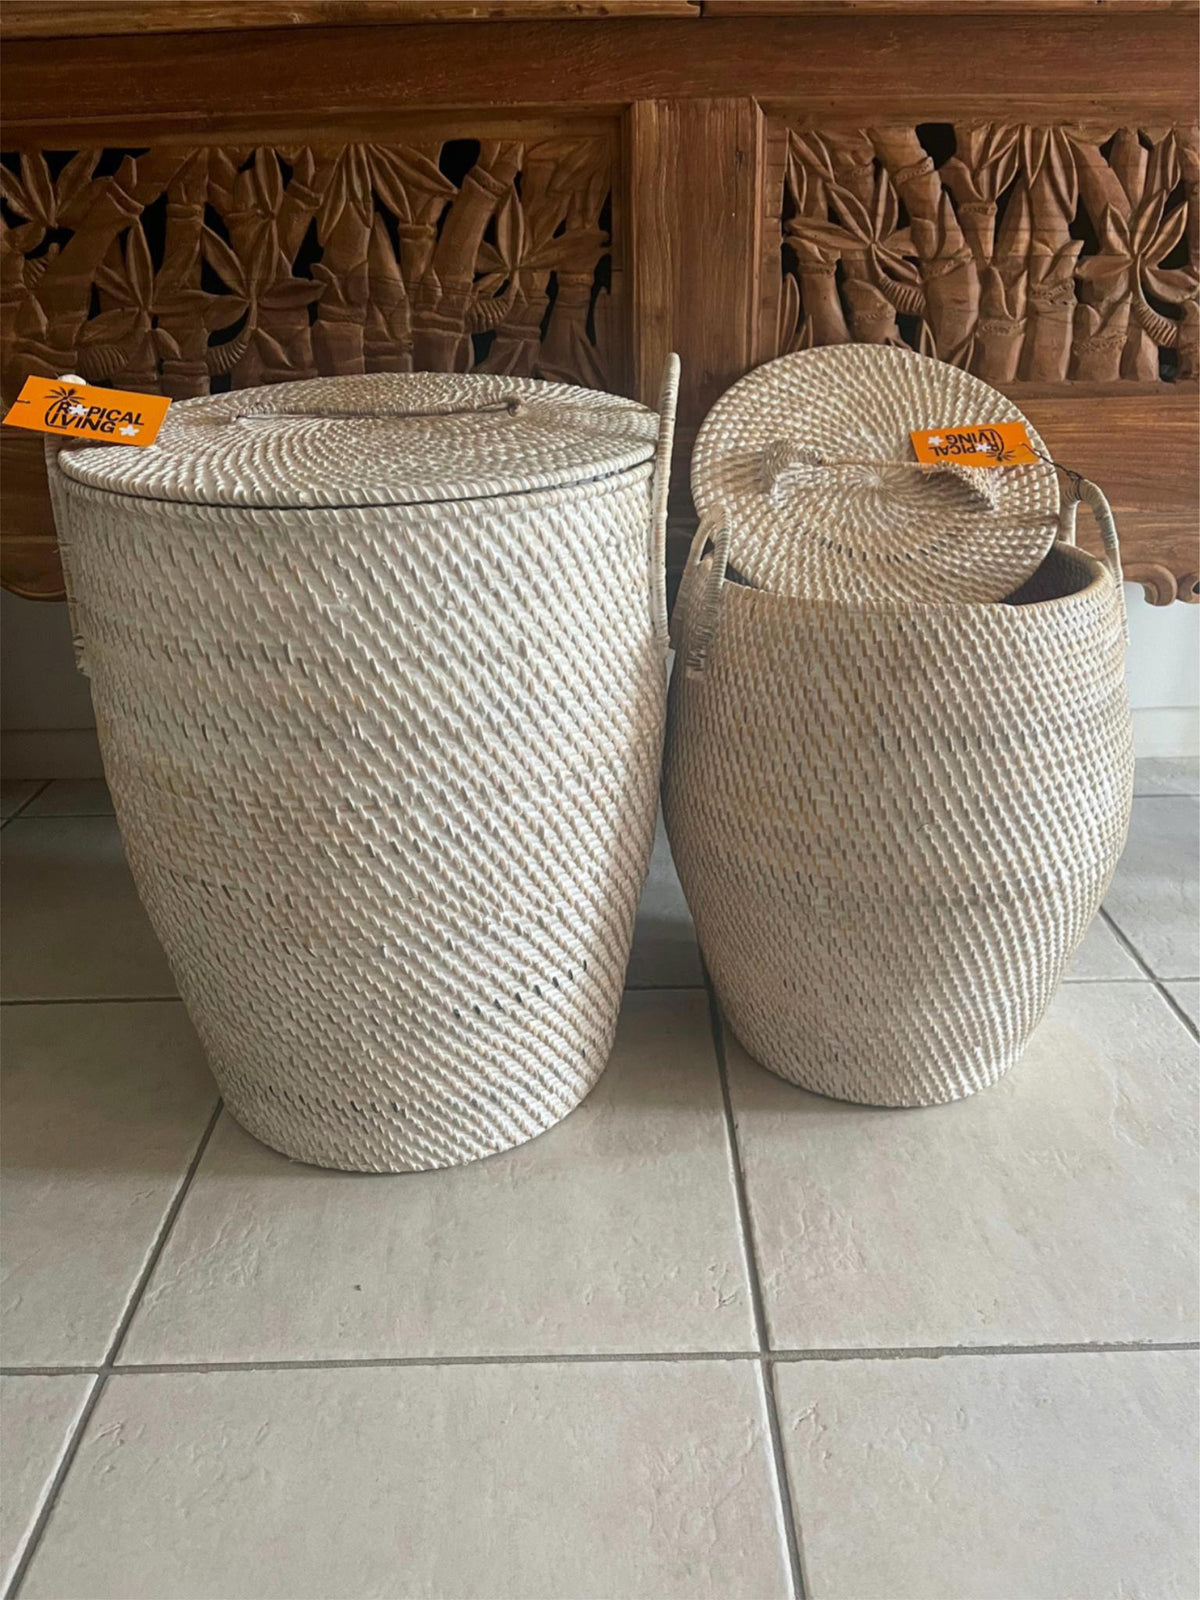 NEW Balinese Hand Woven Large Rattan Basket with Lid - Balinese Basket 2 Sizes